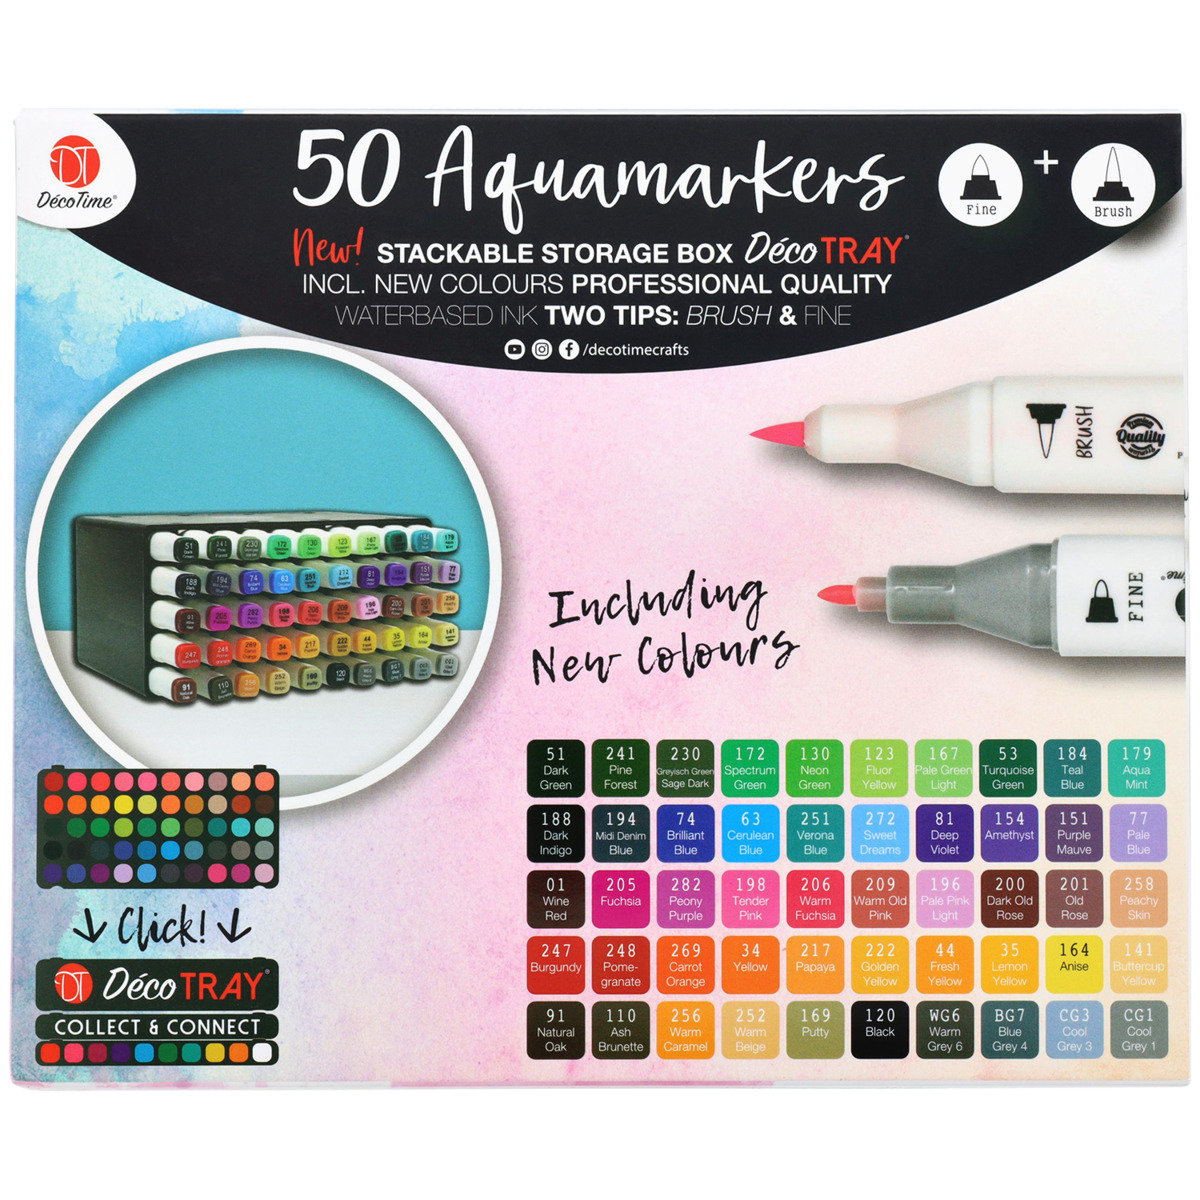 PDF Color Chart Karin Brushmarkers PRO With Recommended Setup 